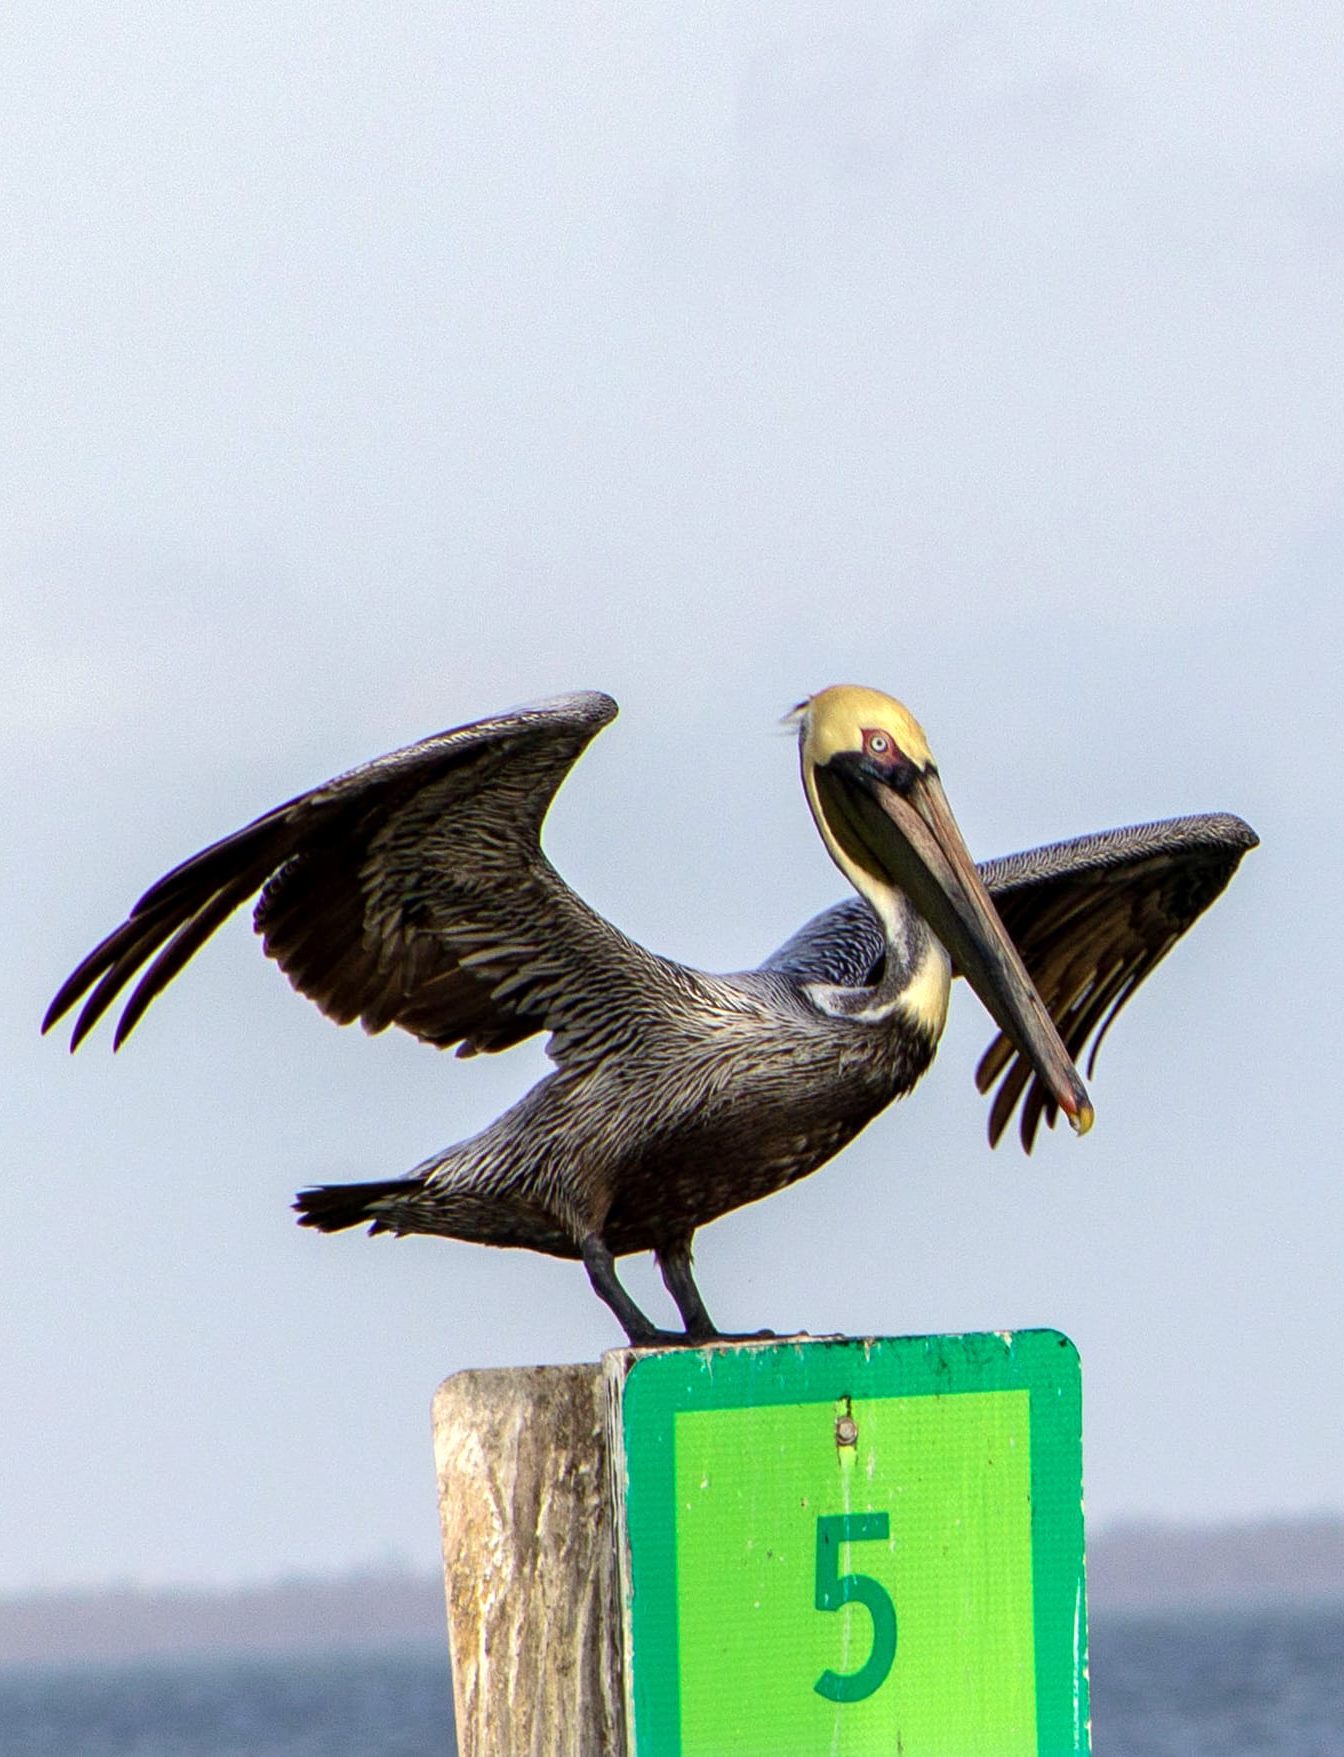 image of pelican on piling